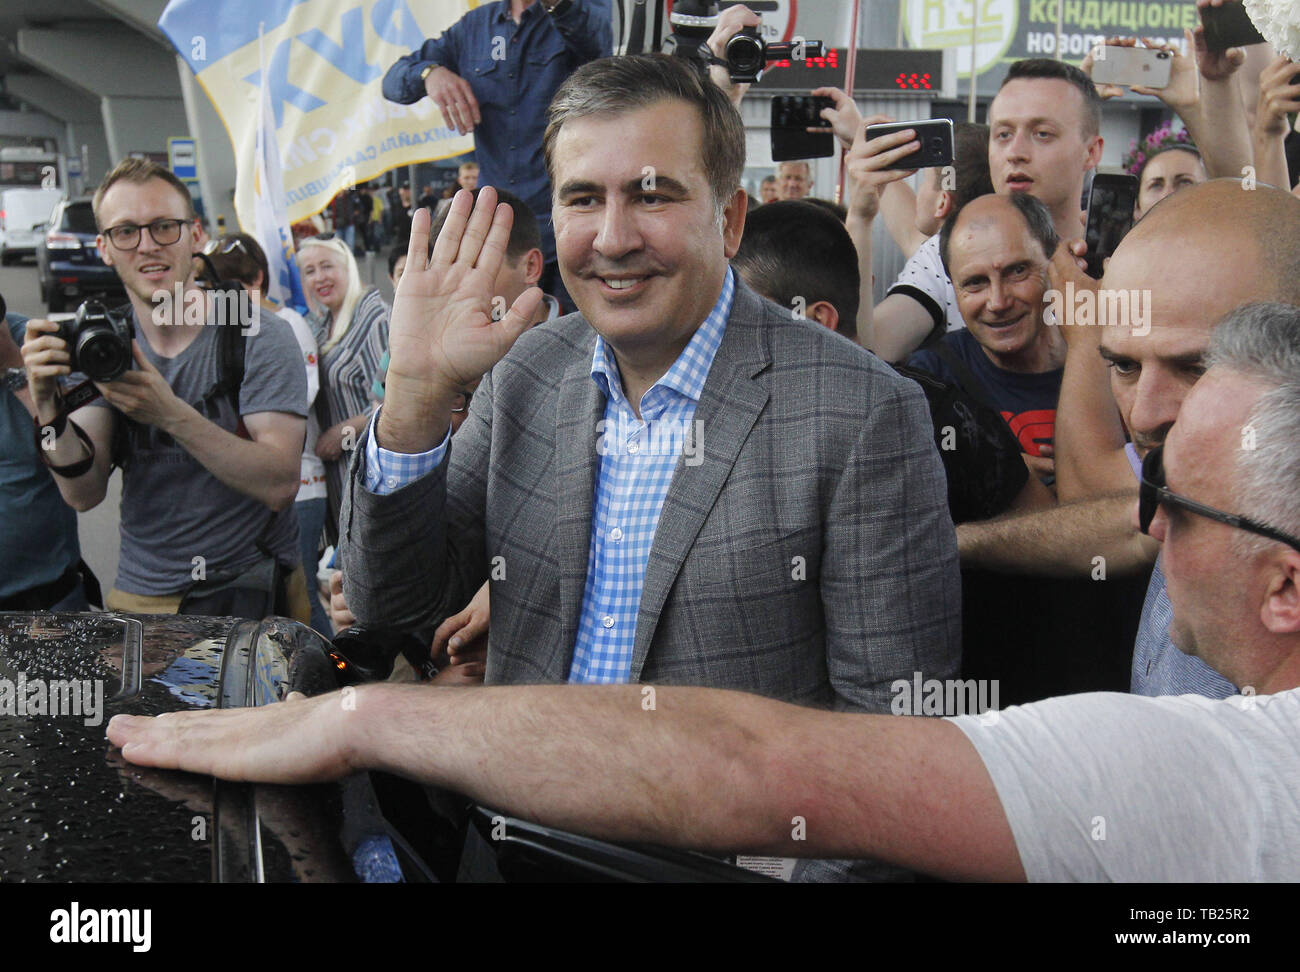 Kiev, Ukraine. 29th May, 2019. Former Georgian president and ex-Odessa Governor MIKHEIL SAAKASHVILI greets his supporters, as he arrives to the Boryspil international airport near Kiev, Ukraine, on 29 May 2019. Saakashvili returned to Ukraine after Ukrainian President Volodymyr Zelensky has reinstated Mikheil Saakashvili's Ukrainian citizenship on 28 May 2019. Zelensky deleted the respective provision from his predecessor Petro Poroshenko's No. 196 order dated July 26, 2017, the UNIAN inform agency reported. Ukrainian opposition leader Mikheil Saakashvili was deported to Poland on 12 February Stock Photo